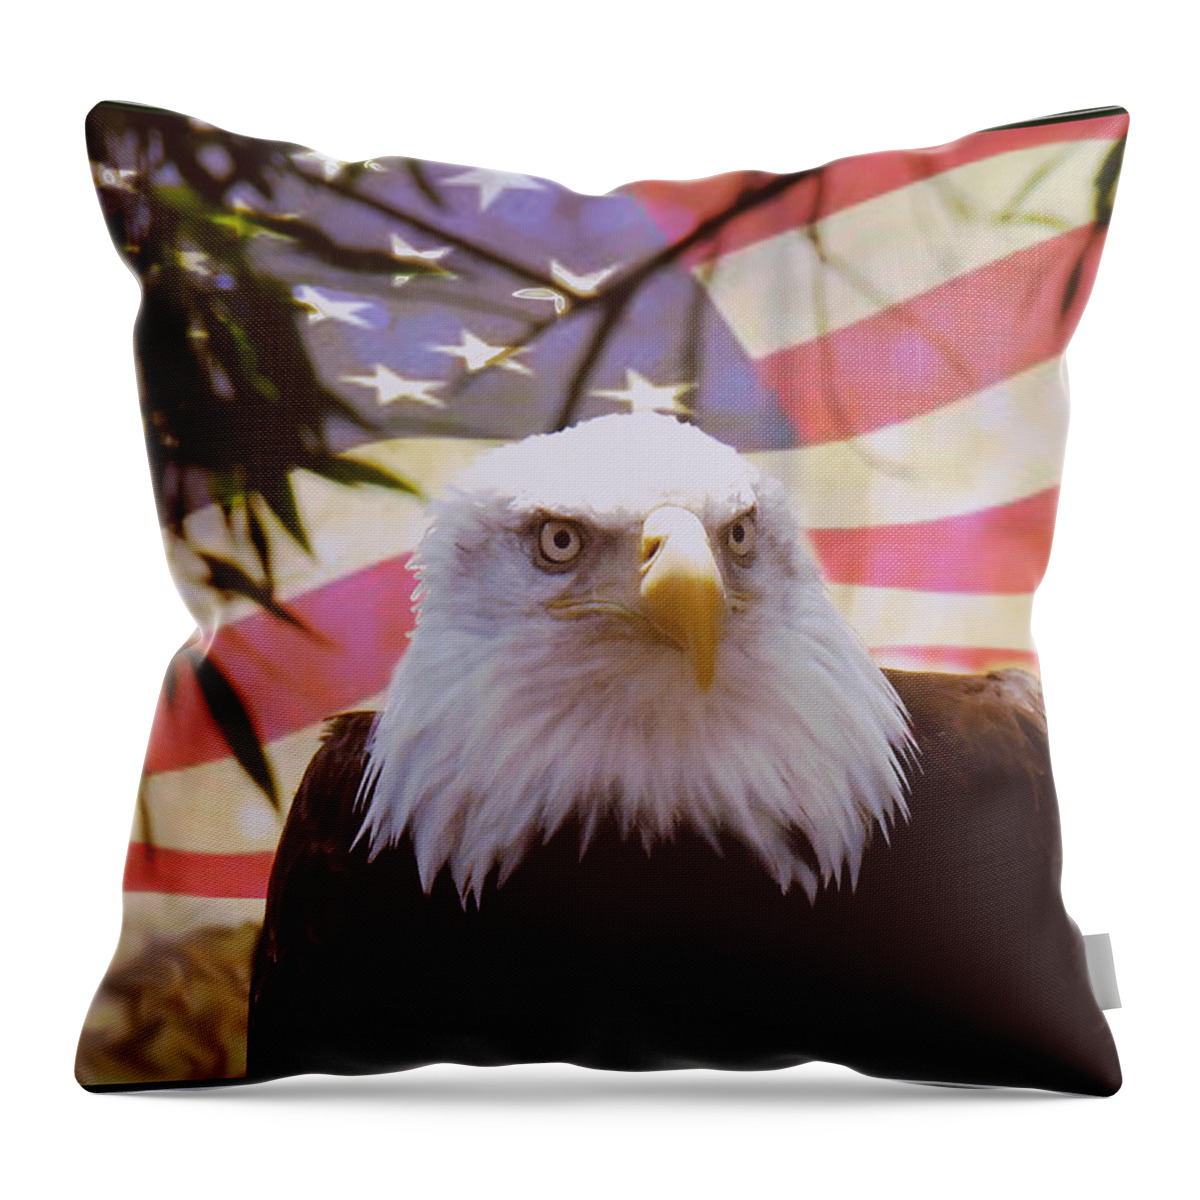 American Eagle Throw Pillow featuring the digital art National Symbols by Kae Cheatham